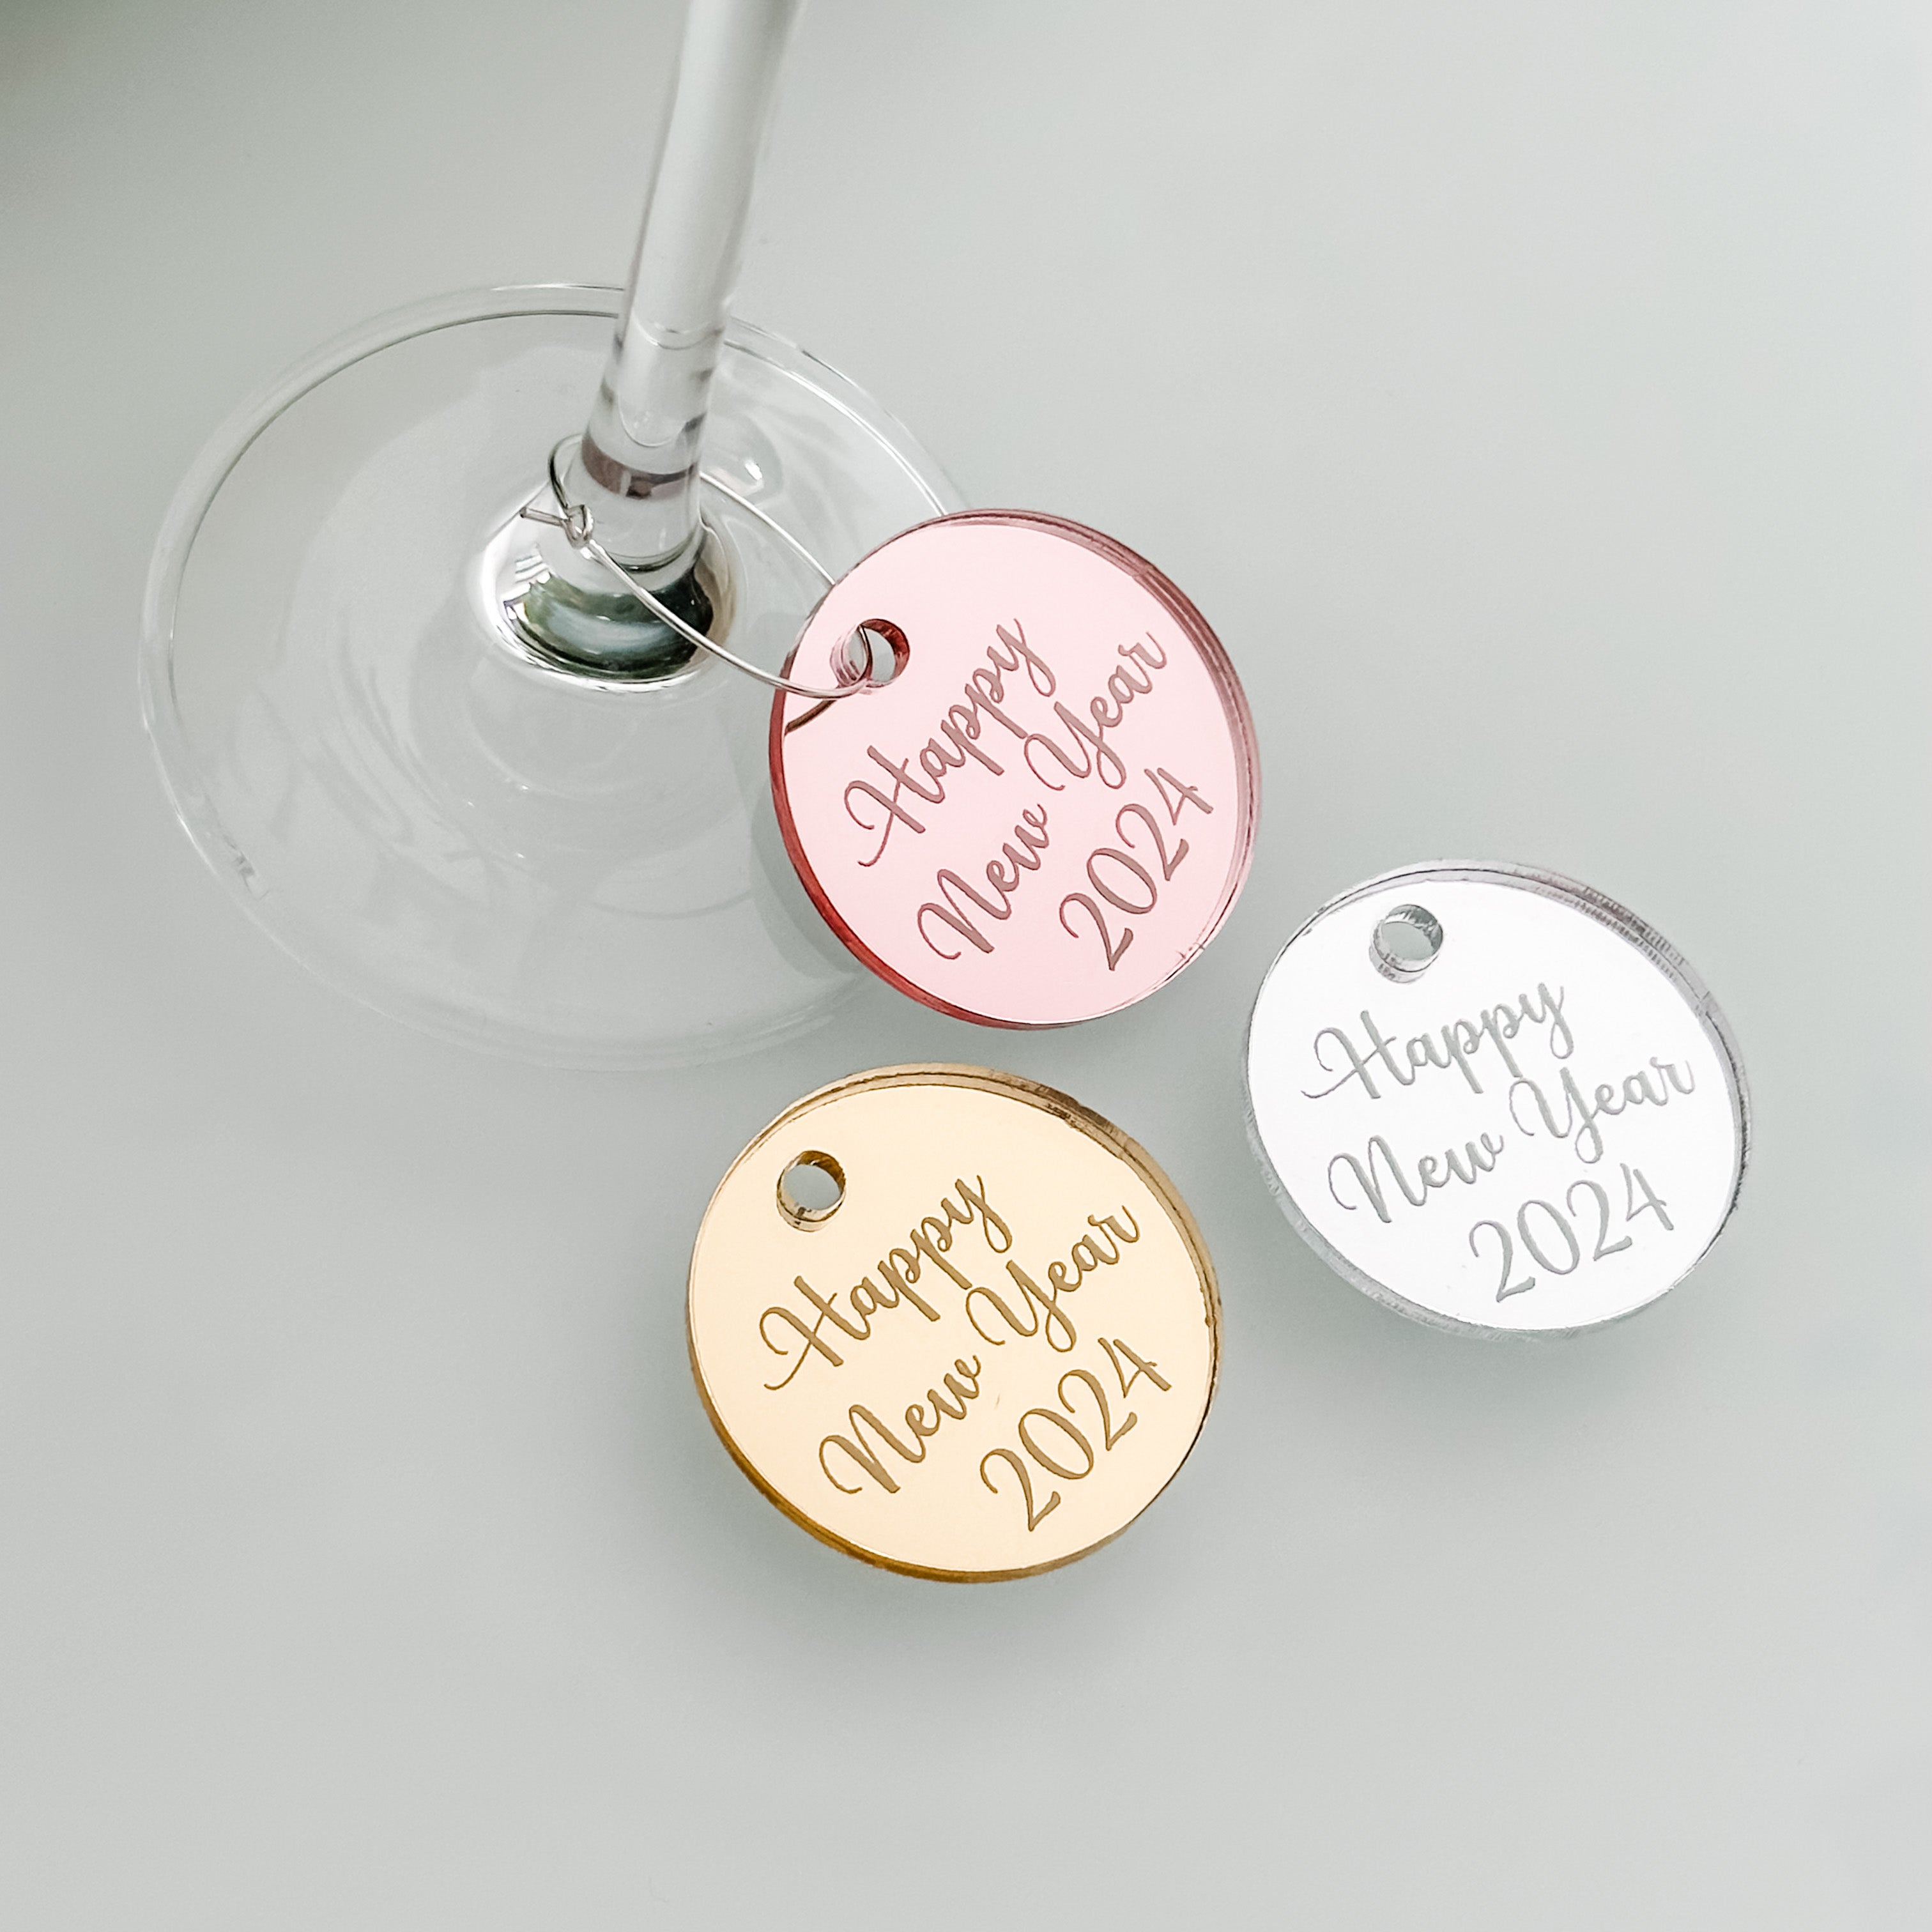 Engraved New Years Eve Party Drinks Tags